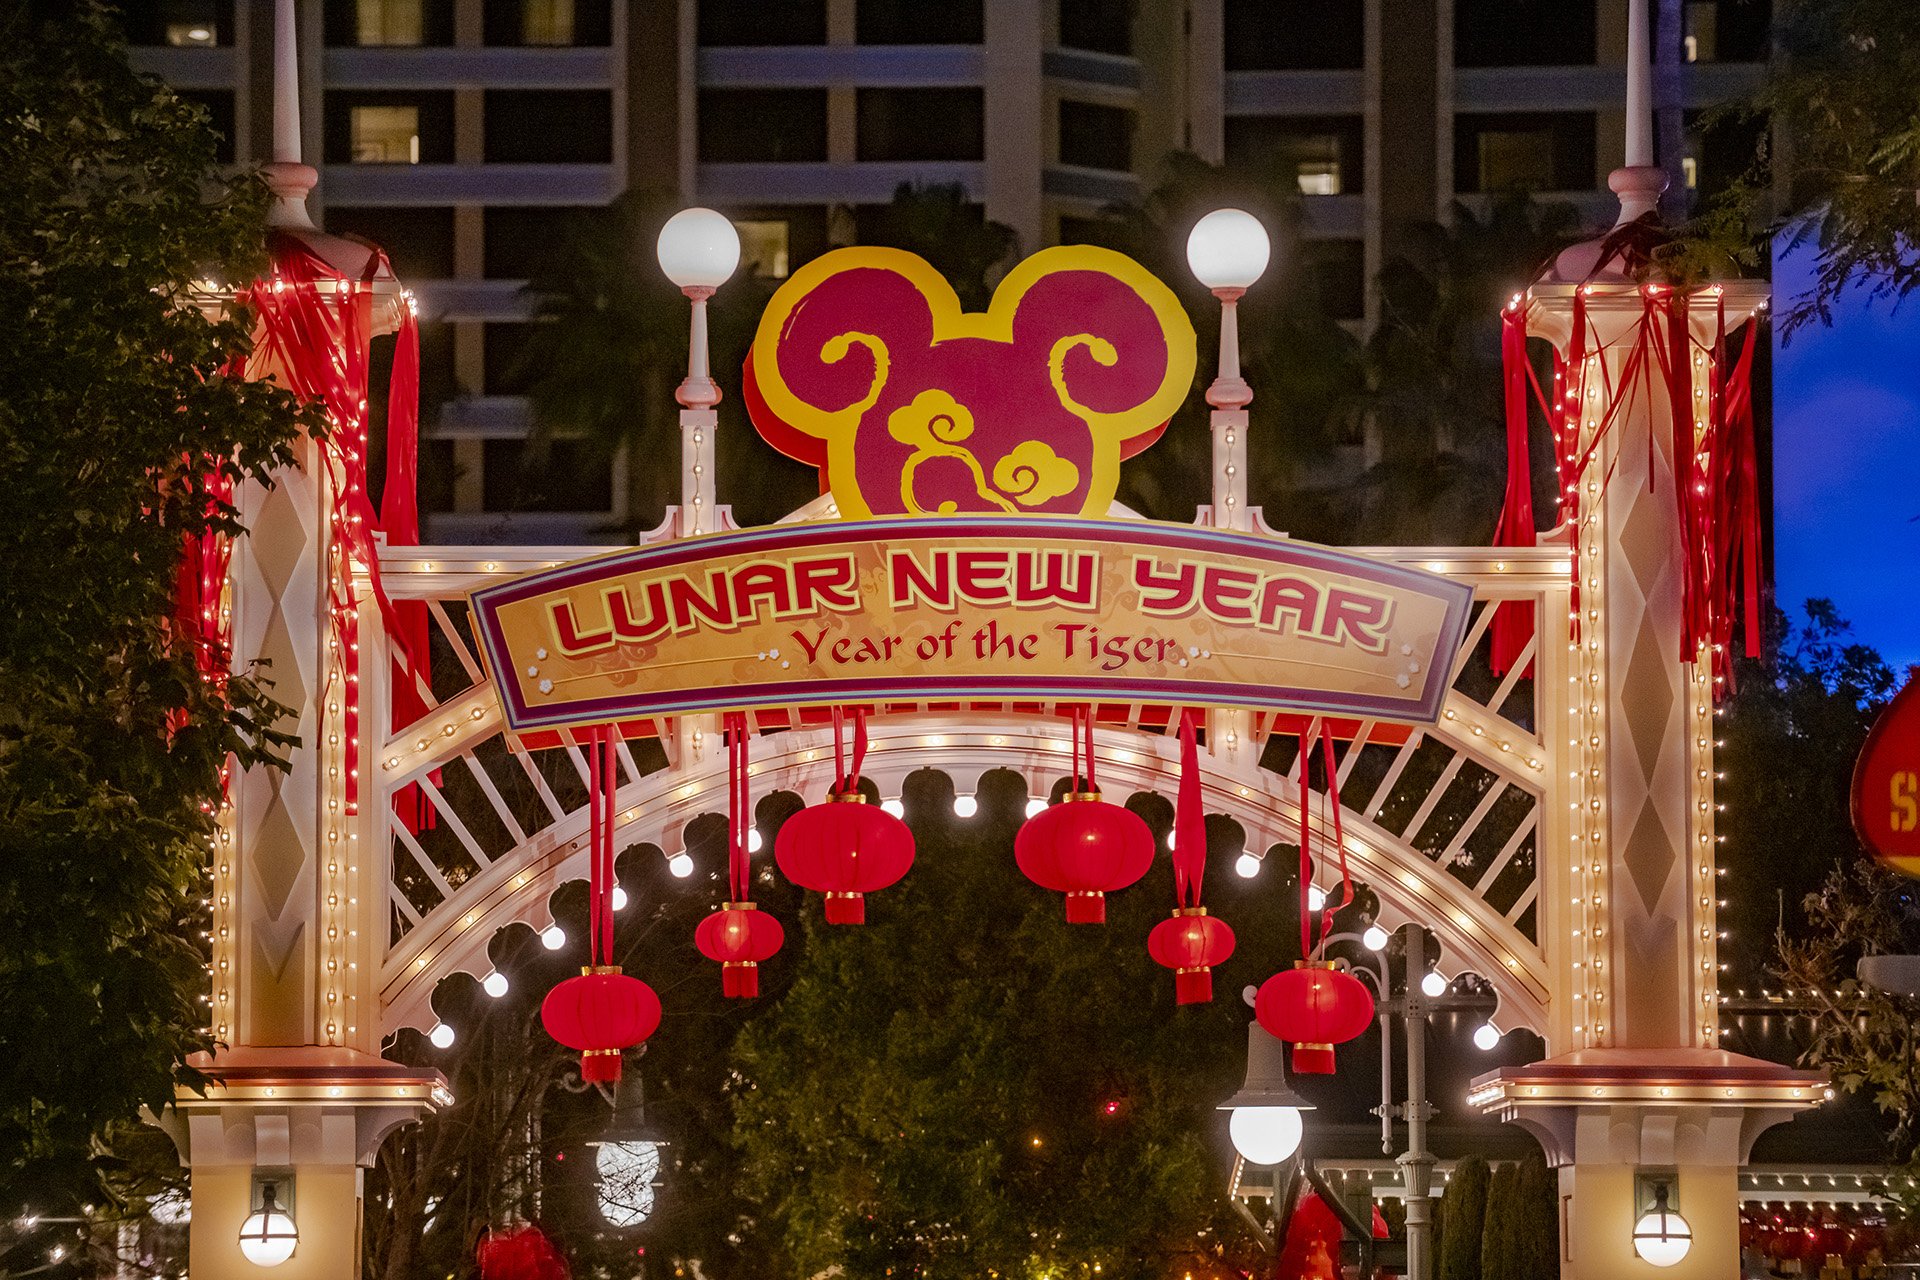  It’s that time of the year when Disney celebrates the lunar new year! This year marks the year of the tiger. 